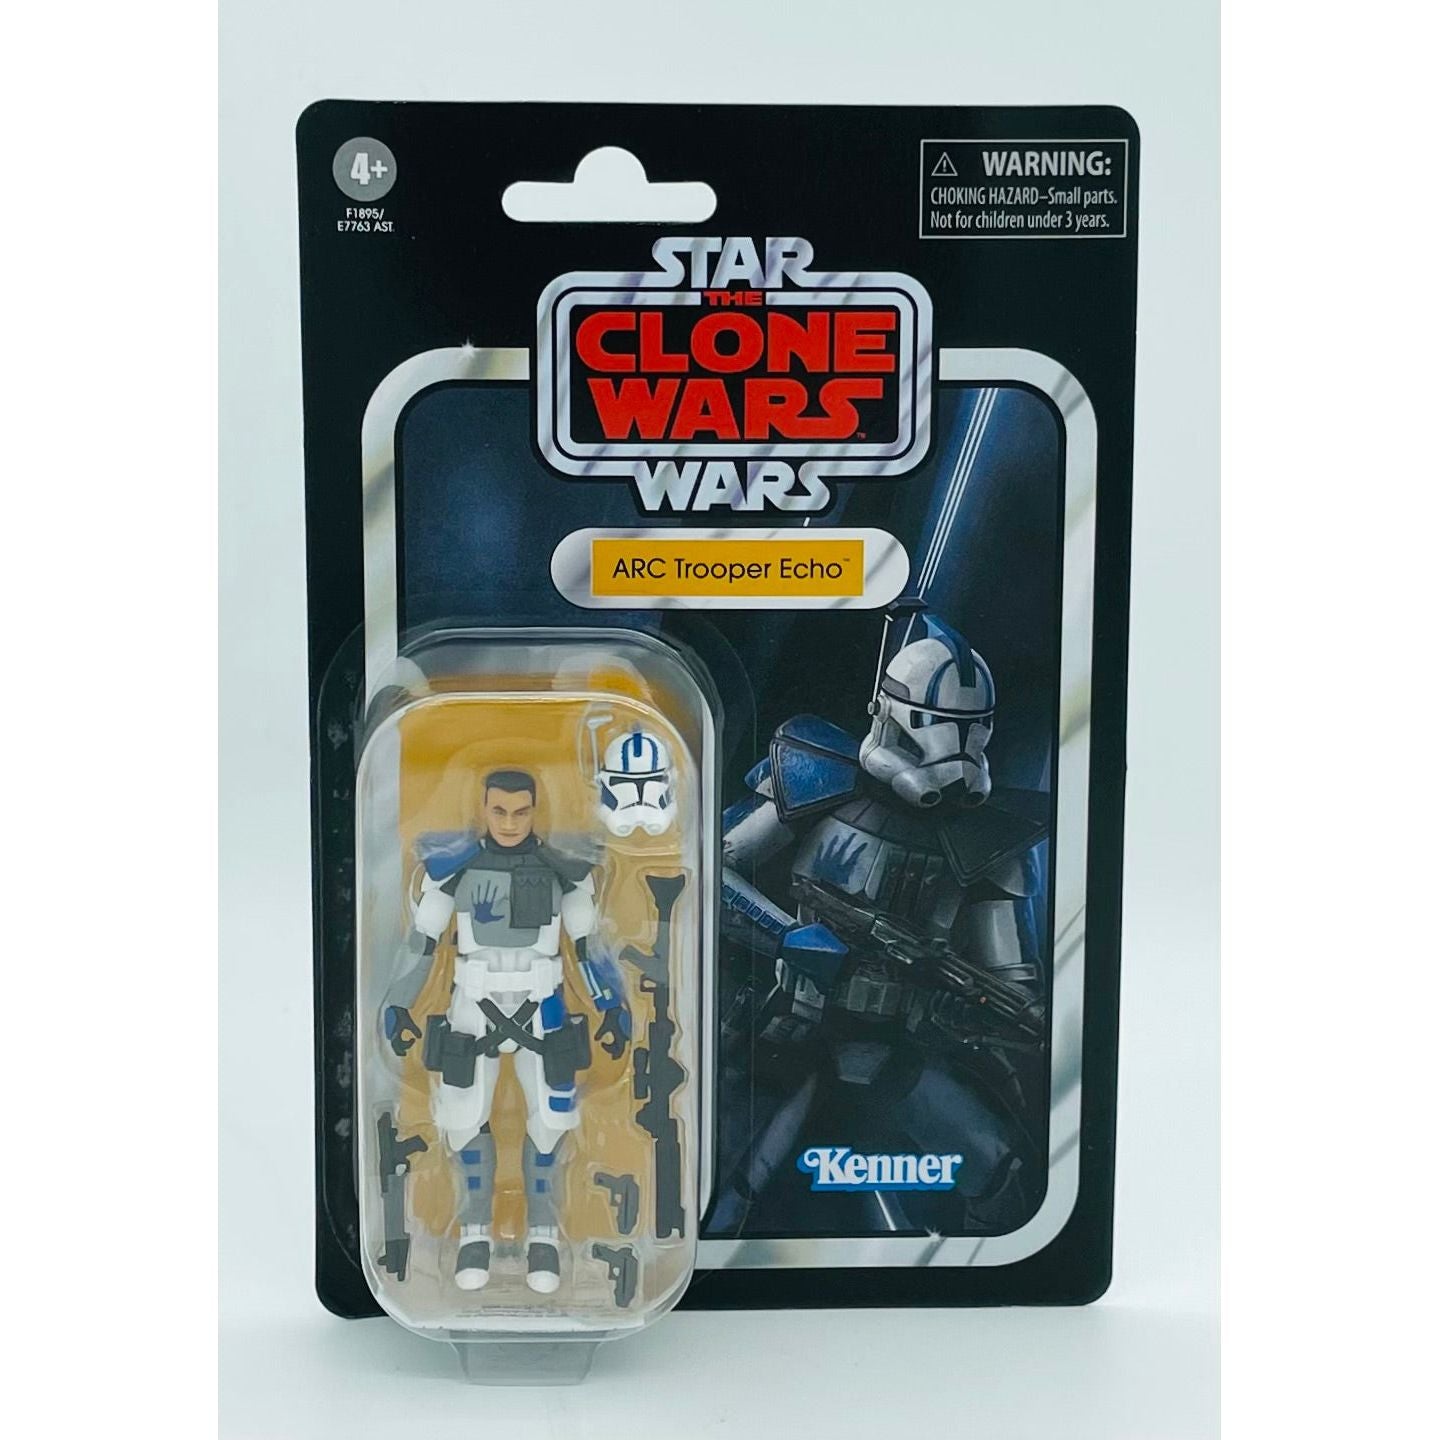 Star Wars The Vintage Collection ARC Trooper Echo Toy, 3.75-Inch-Scale The Clone Wars Figure, Toys for Kids Ages 4 and Up,F1895